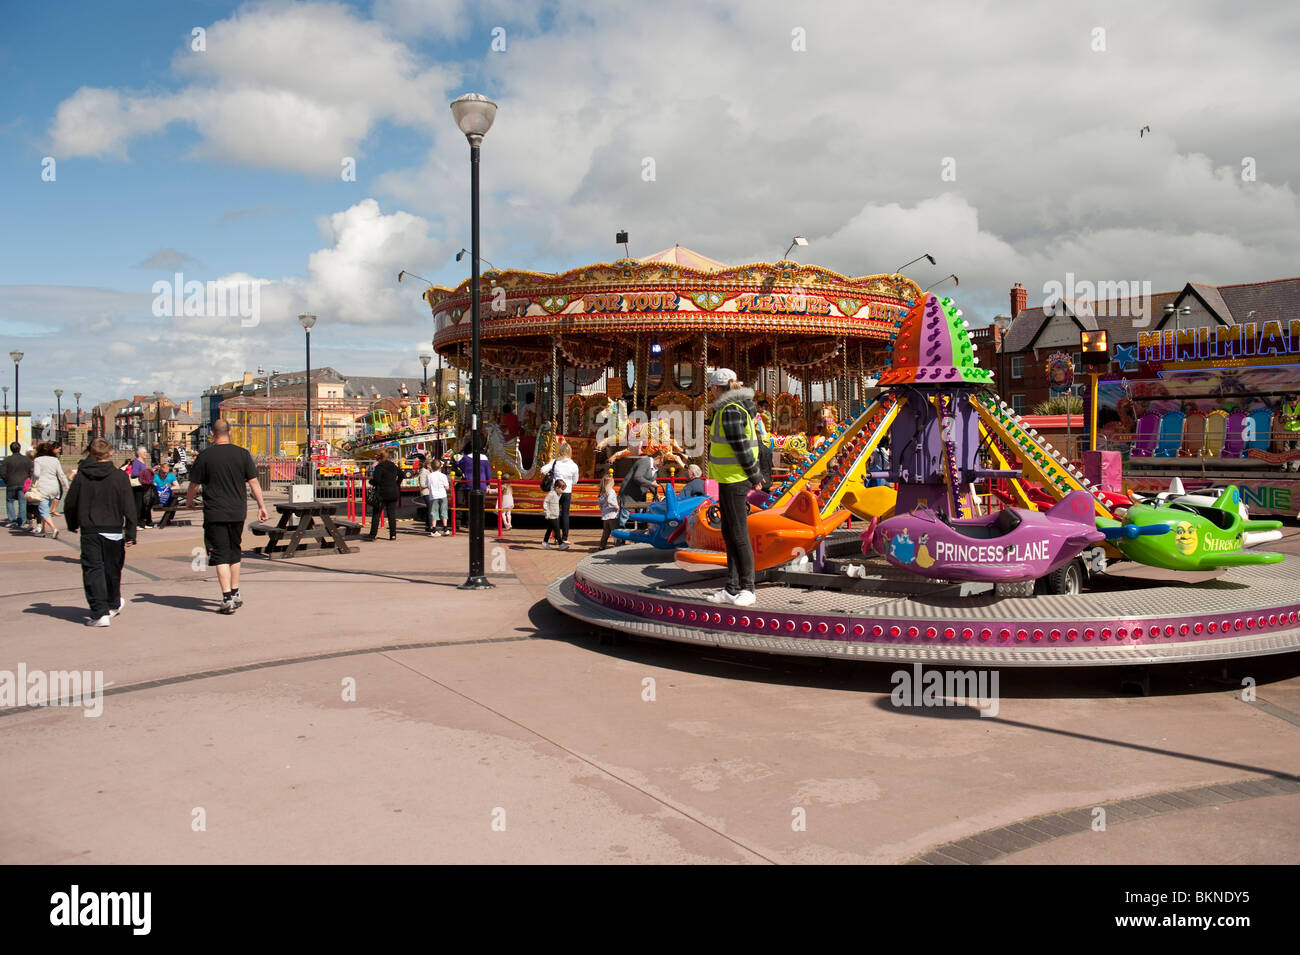 children's Funfair on The promenade and seaside, Rhyl, north wales UK Stock Photo